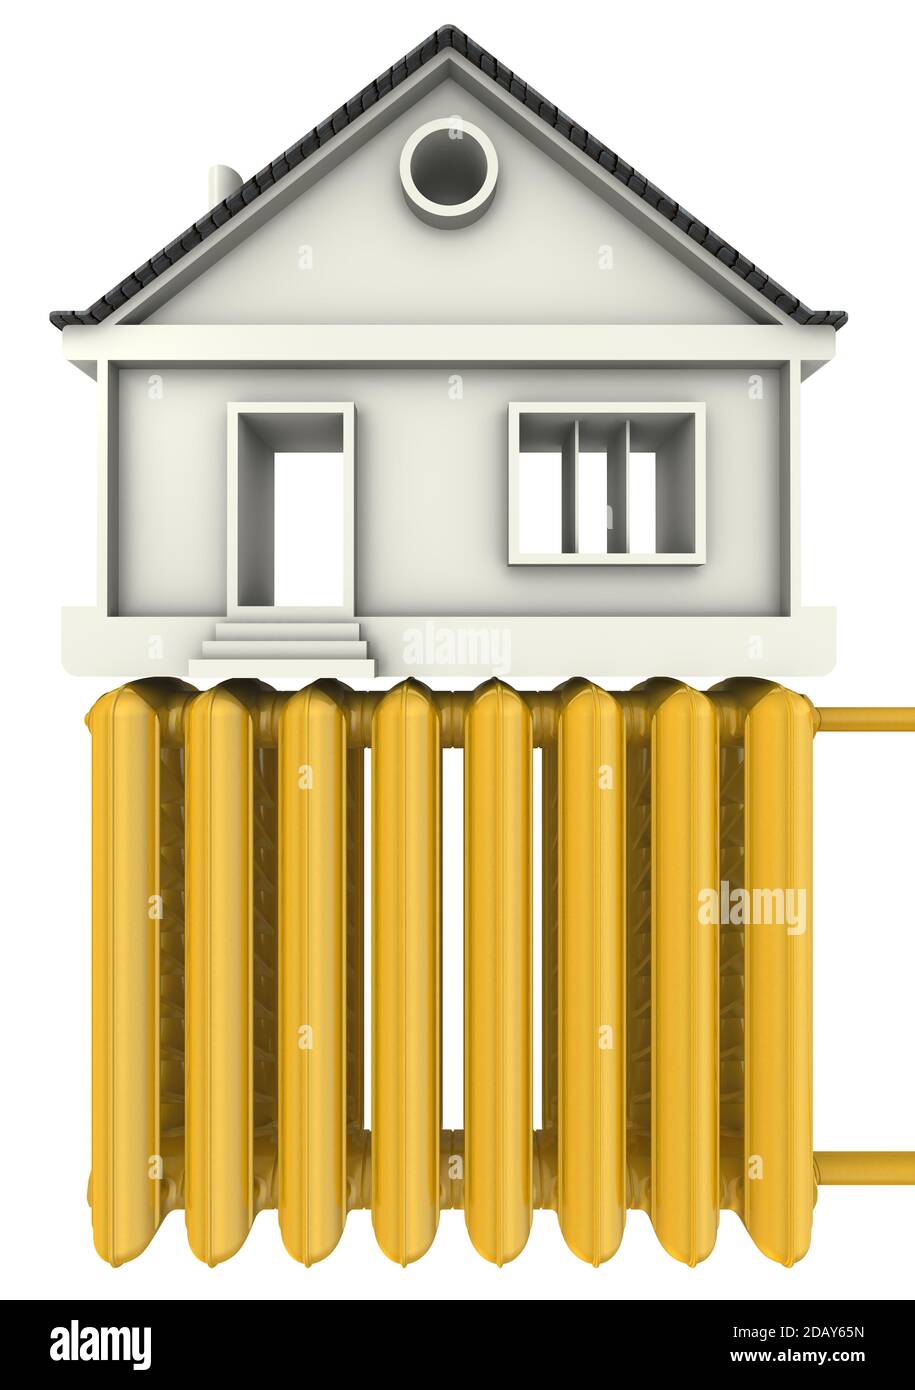 House heating. The concept. One golden heating radiator with symbolic house, isolated on white background. 3D illustration Stock Photo